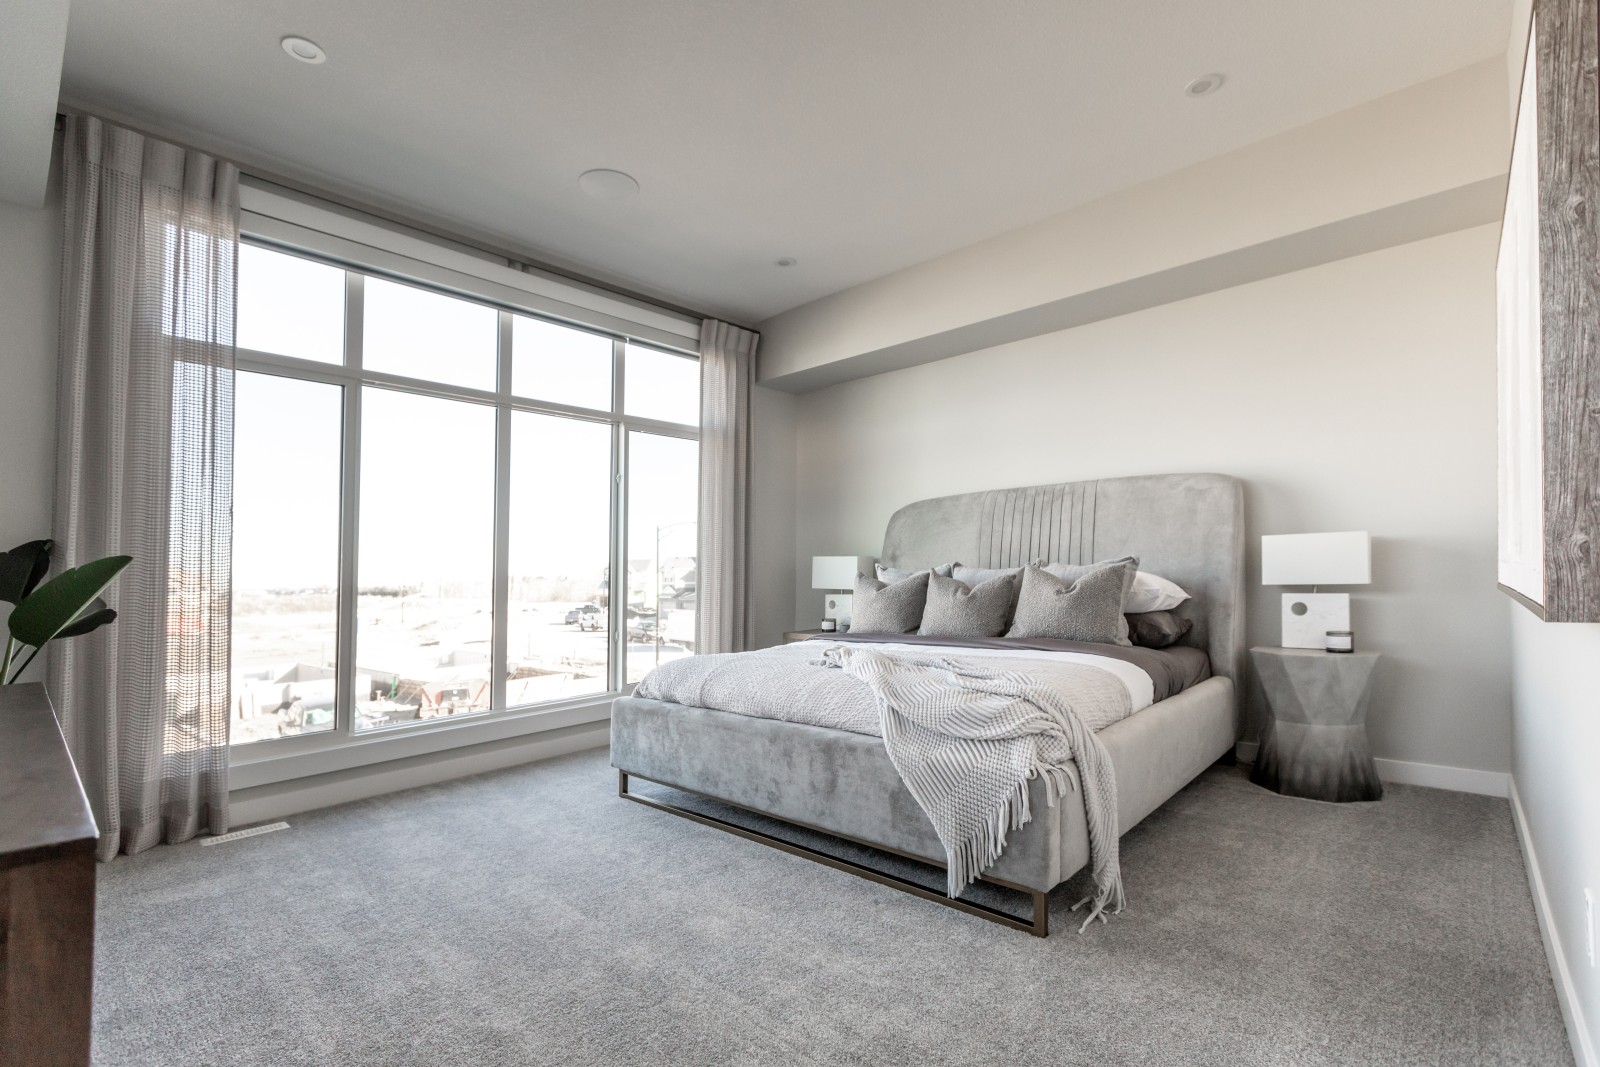 Natural light floods the master bedroom of the Cyrus showhome through an expansive window at the front of the room